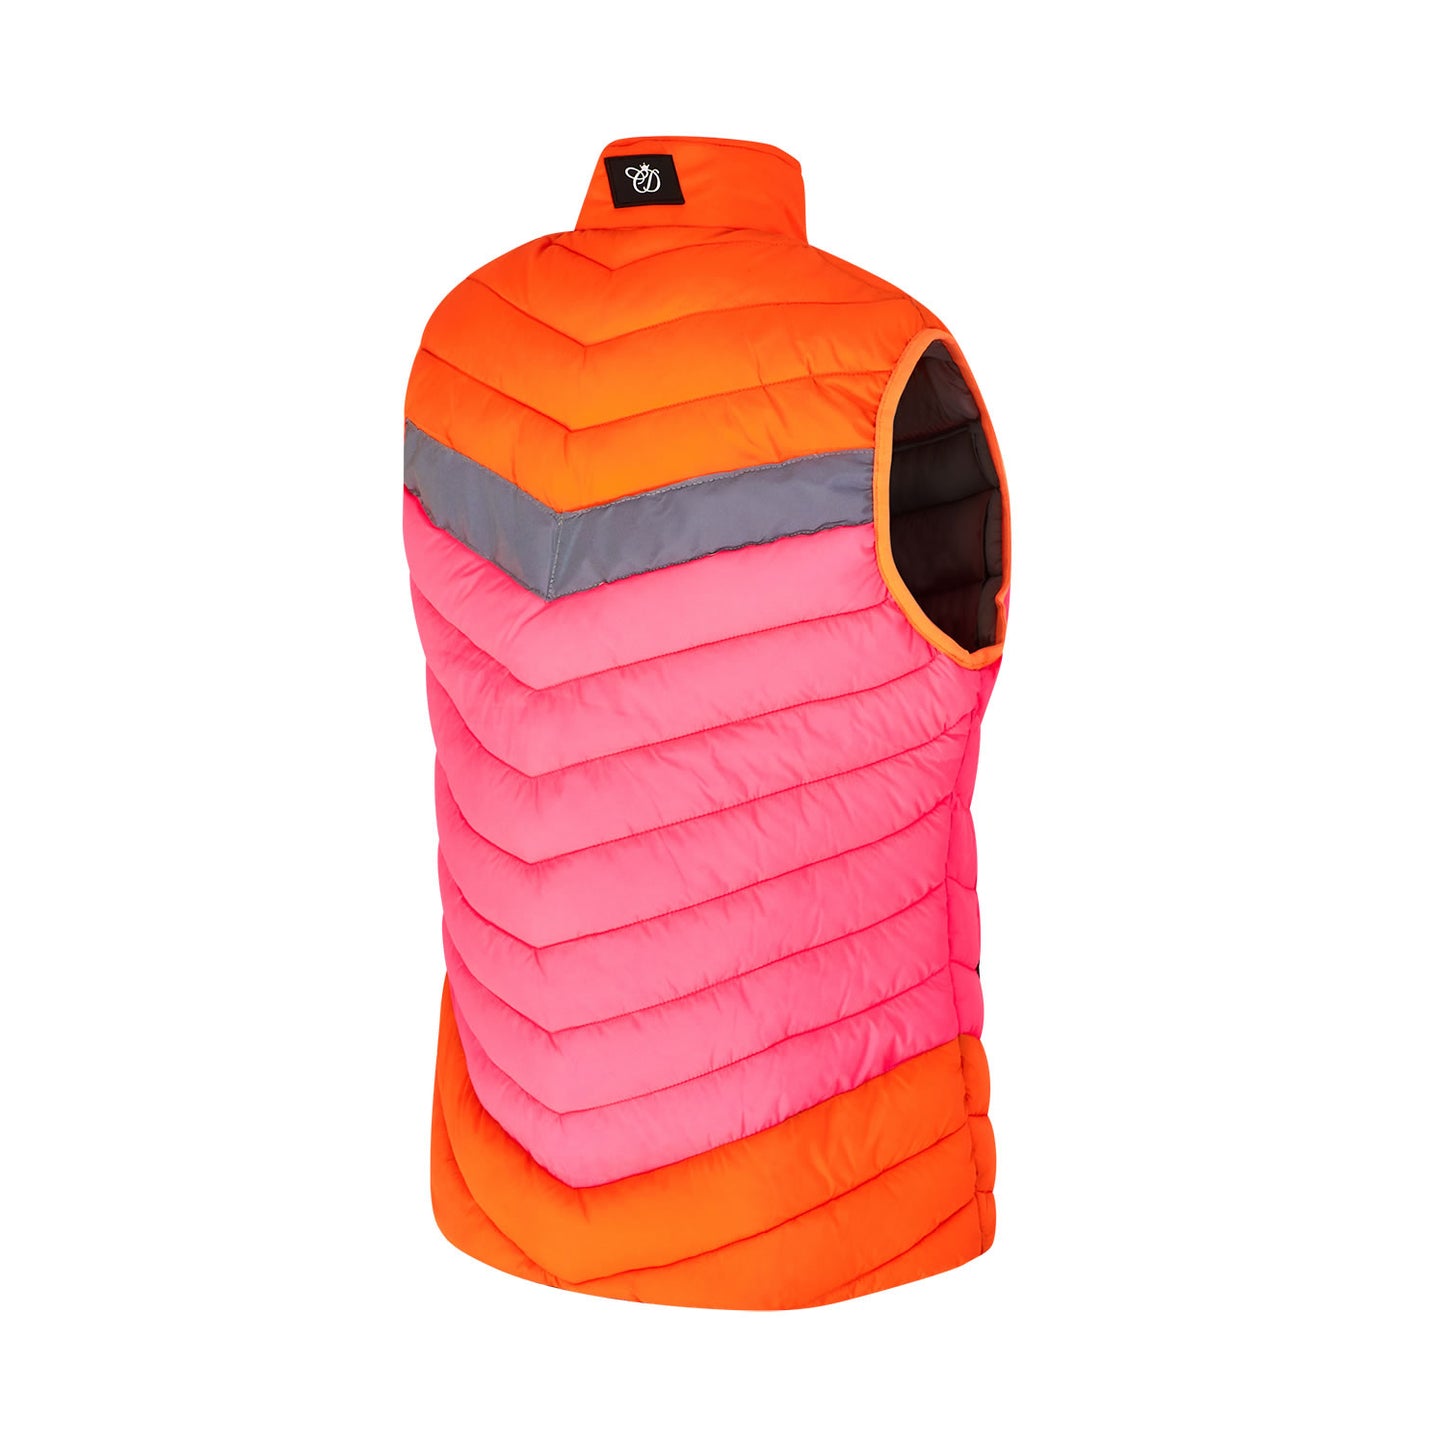 Equisafety Quilted Hi-Vis Gilet